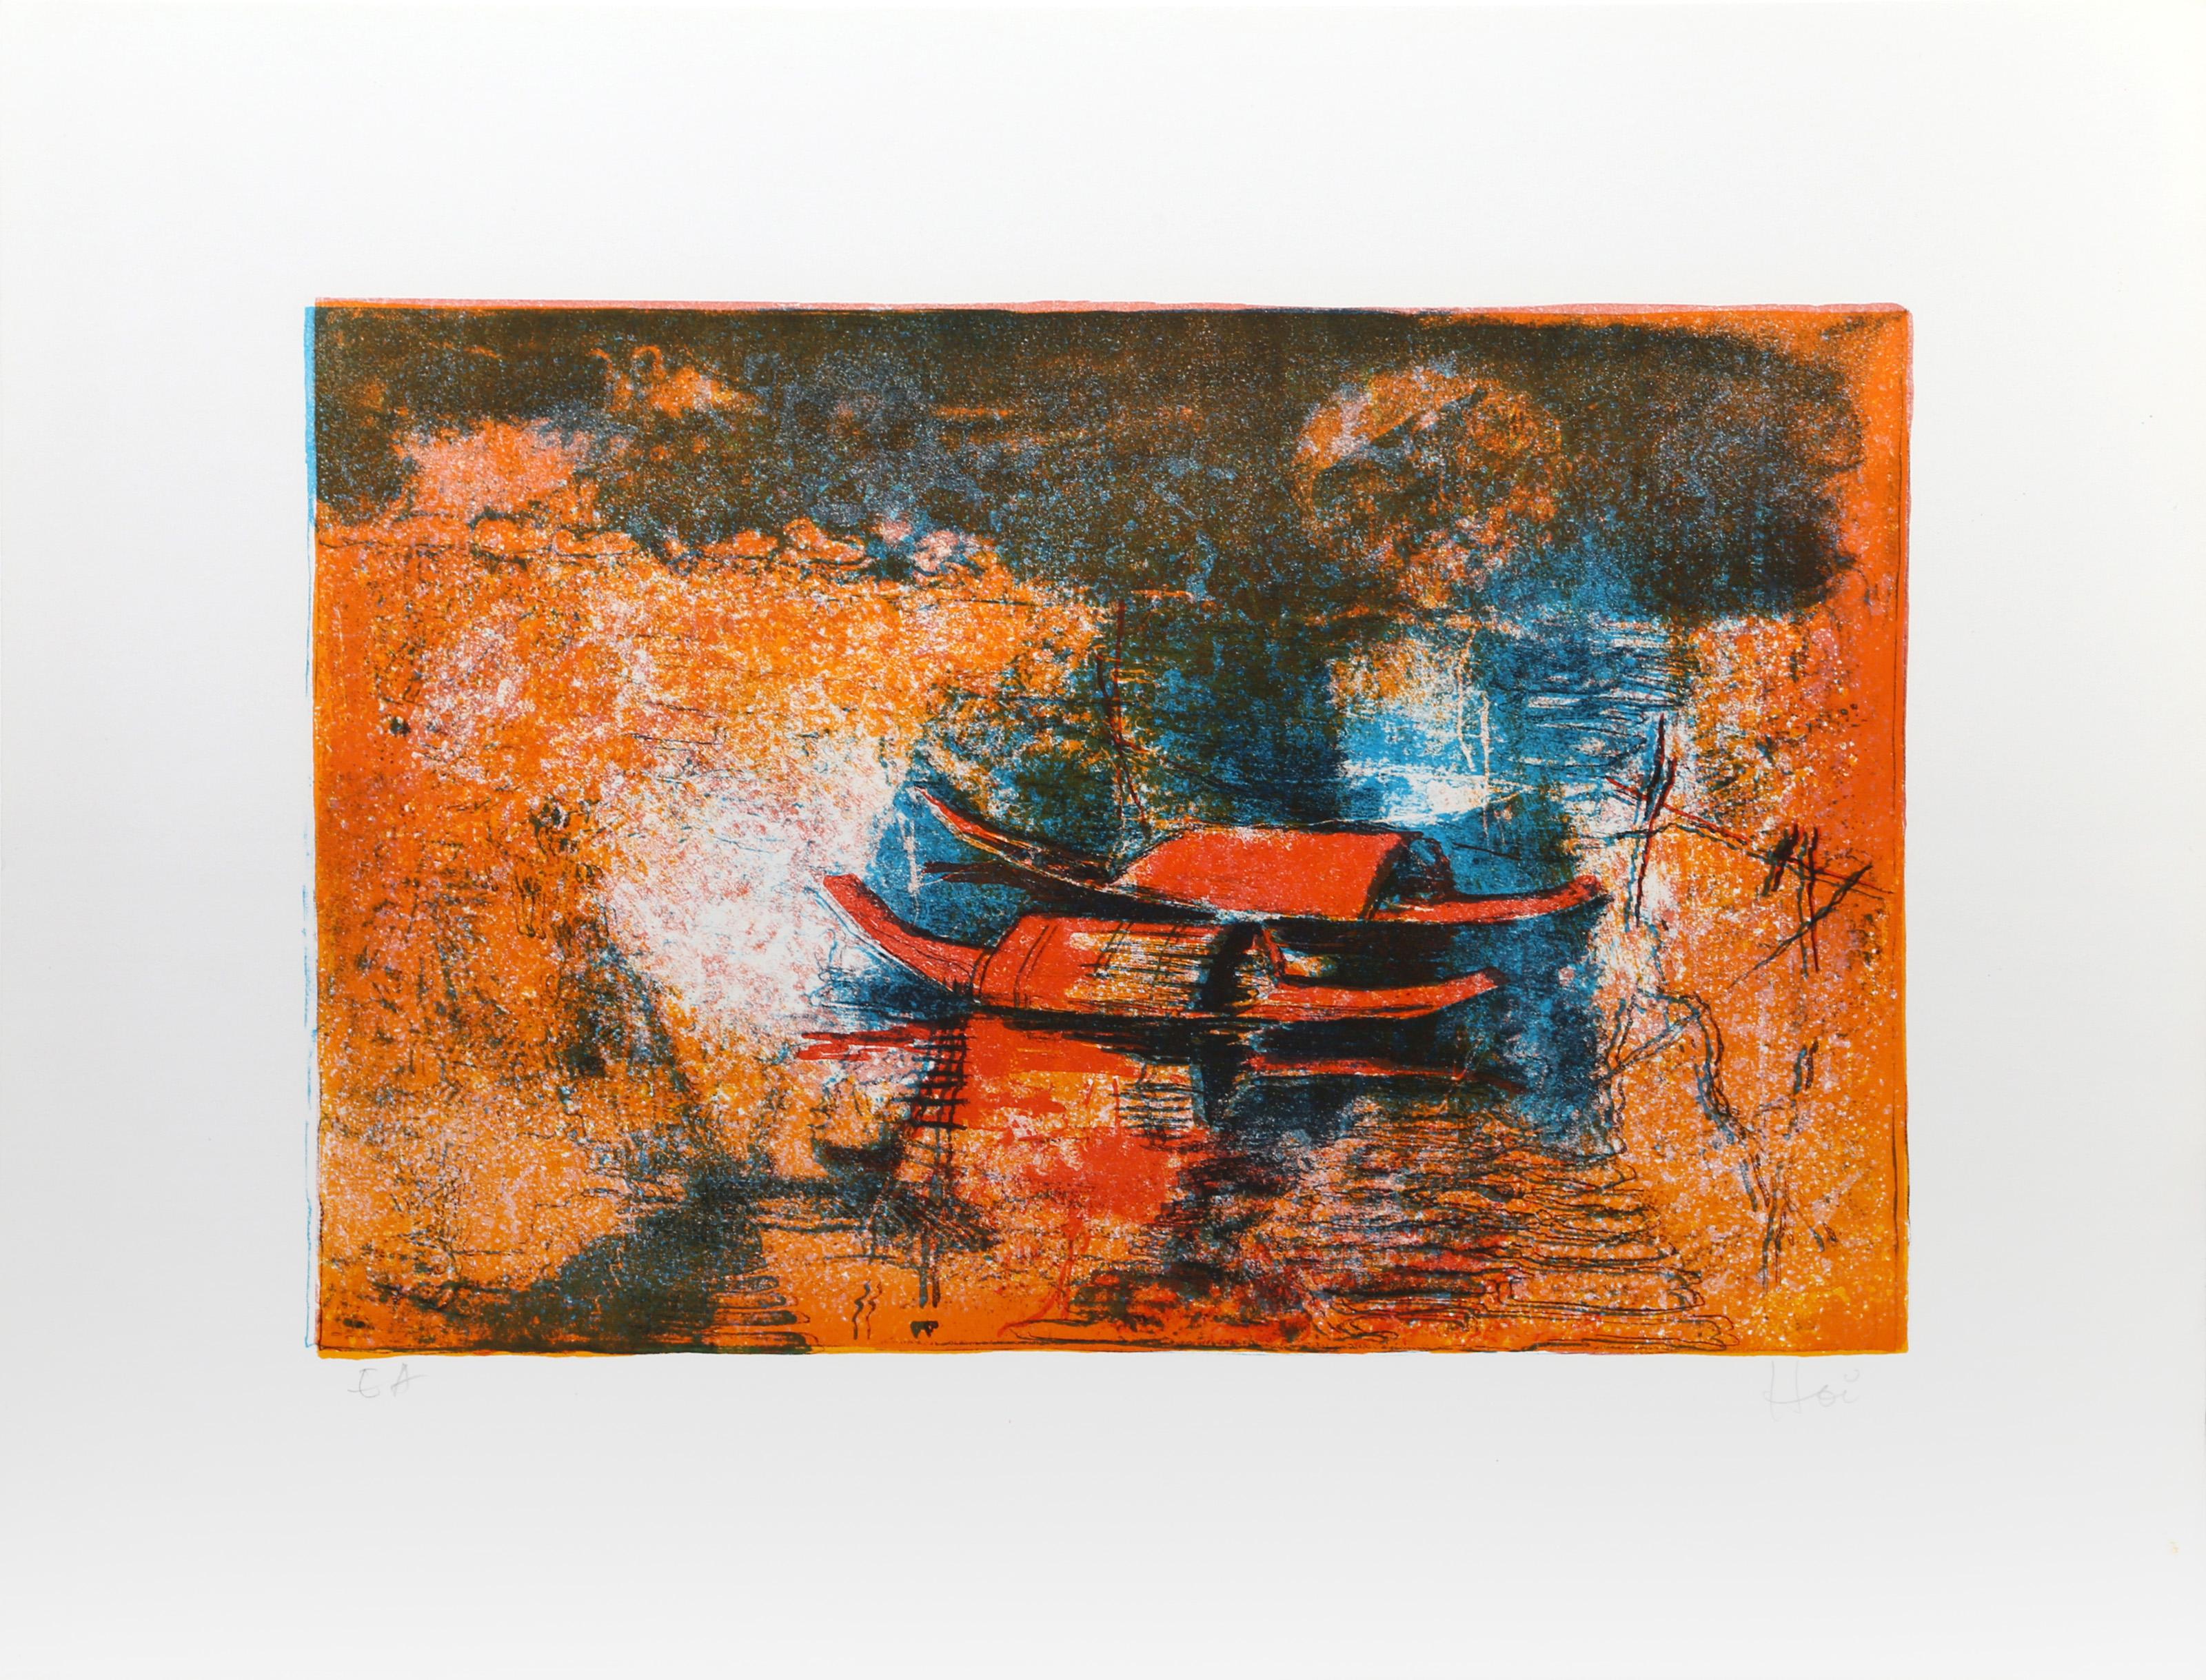 Lebadang (aka Hoi), Vietnamese (1922 - 2015) -  Docked Boats 4. Medium: Lithograph on Rives BFK, signed "Hoi" and numbered in pencil, Image Size: 12.5 x 18.5 inches, Size: 19.5 x 25.5 in. (49.53 x 64.77 cm), Description: Lebadang was a Vietnam-born